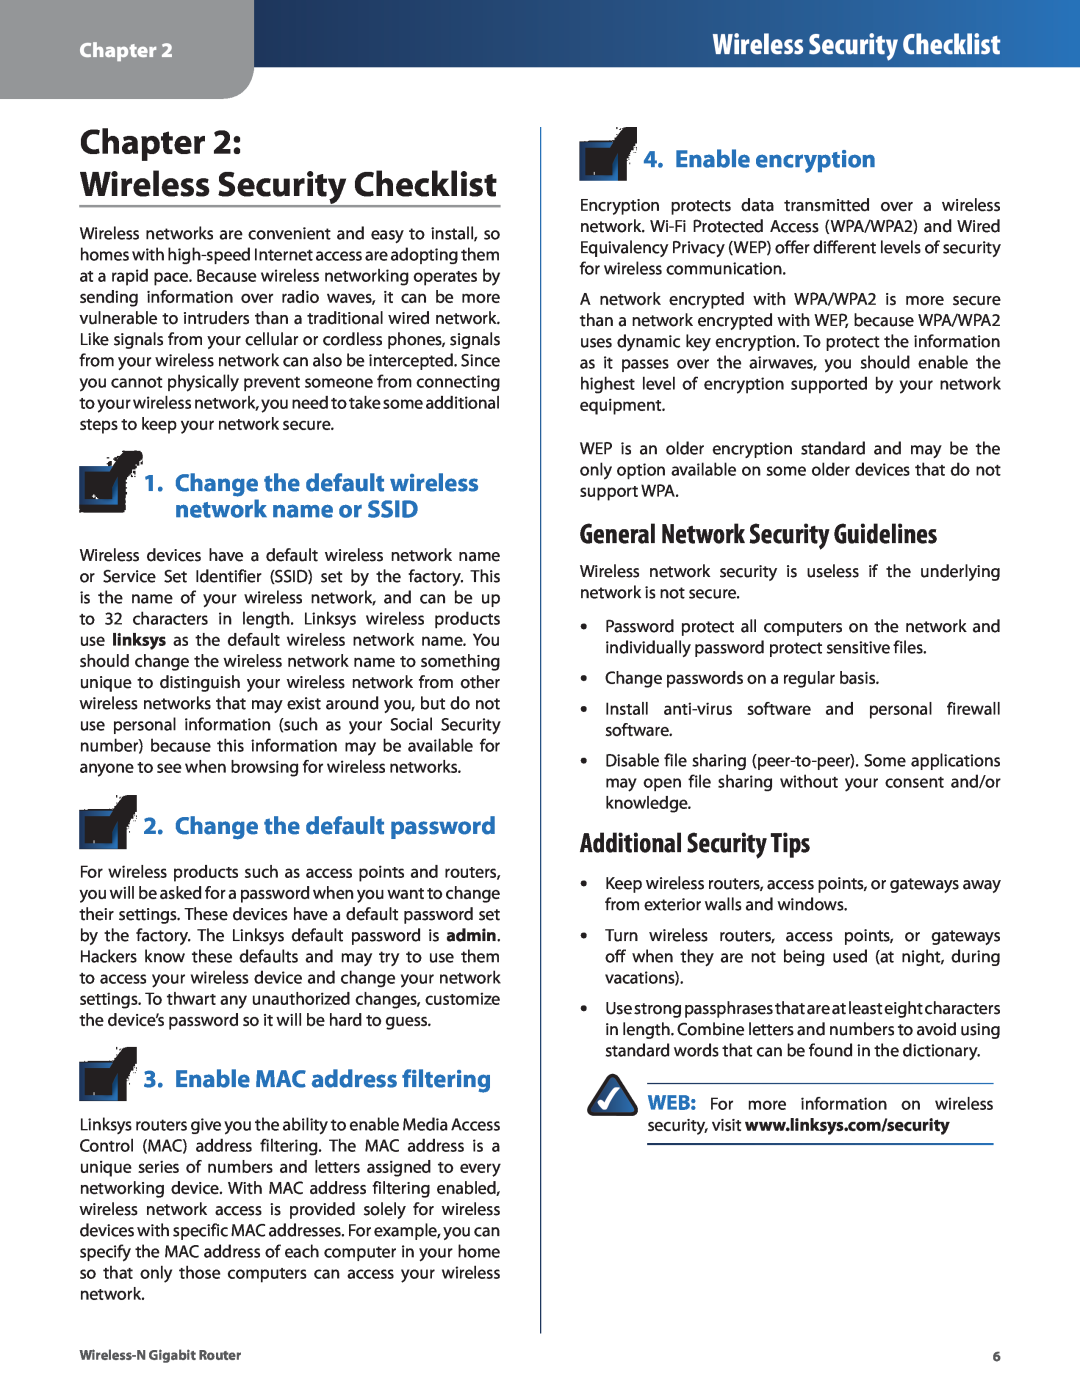 Linksys WRT310N manual Chapter Wireless Security Checklist, General Network Security Guidelines, Additional Security Tips 